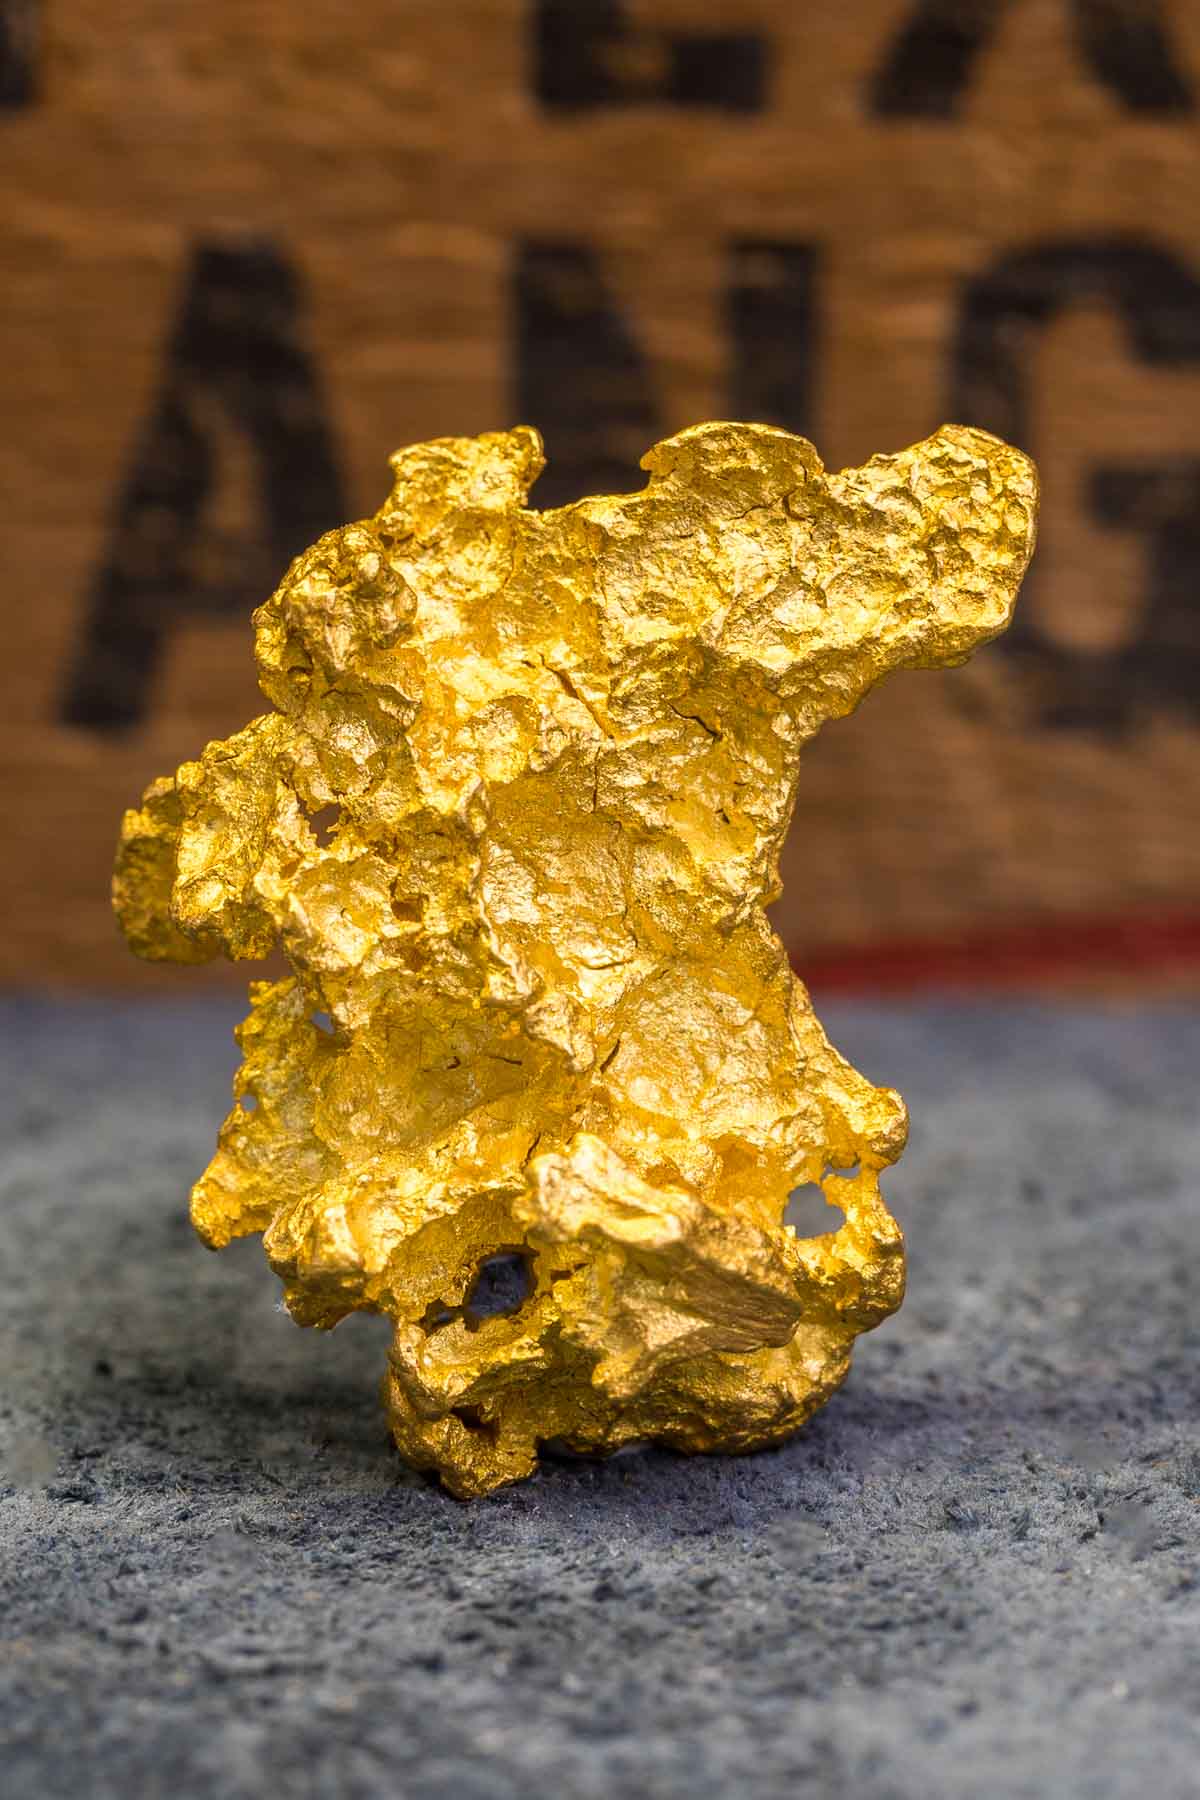 Intricate Half Moon Shaped Australian Gold Nugget - 14.2 g - $1,205.00 : Natural gold Nuggets Sale - Buy Gold Nuggets and Specimens, The finest jewelry/investment grade gold nuggets from the world